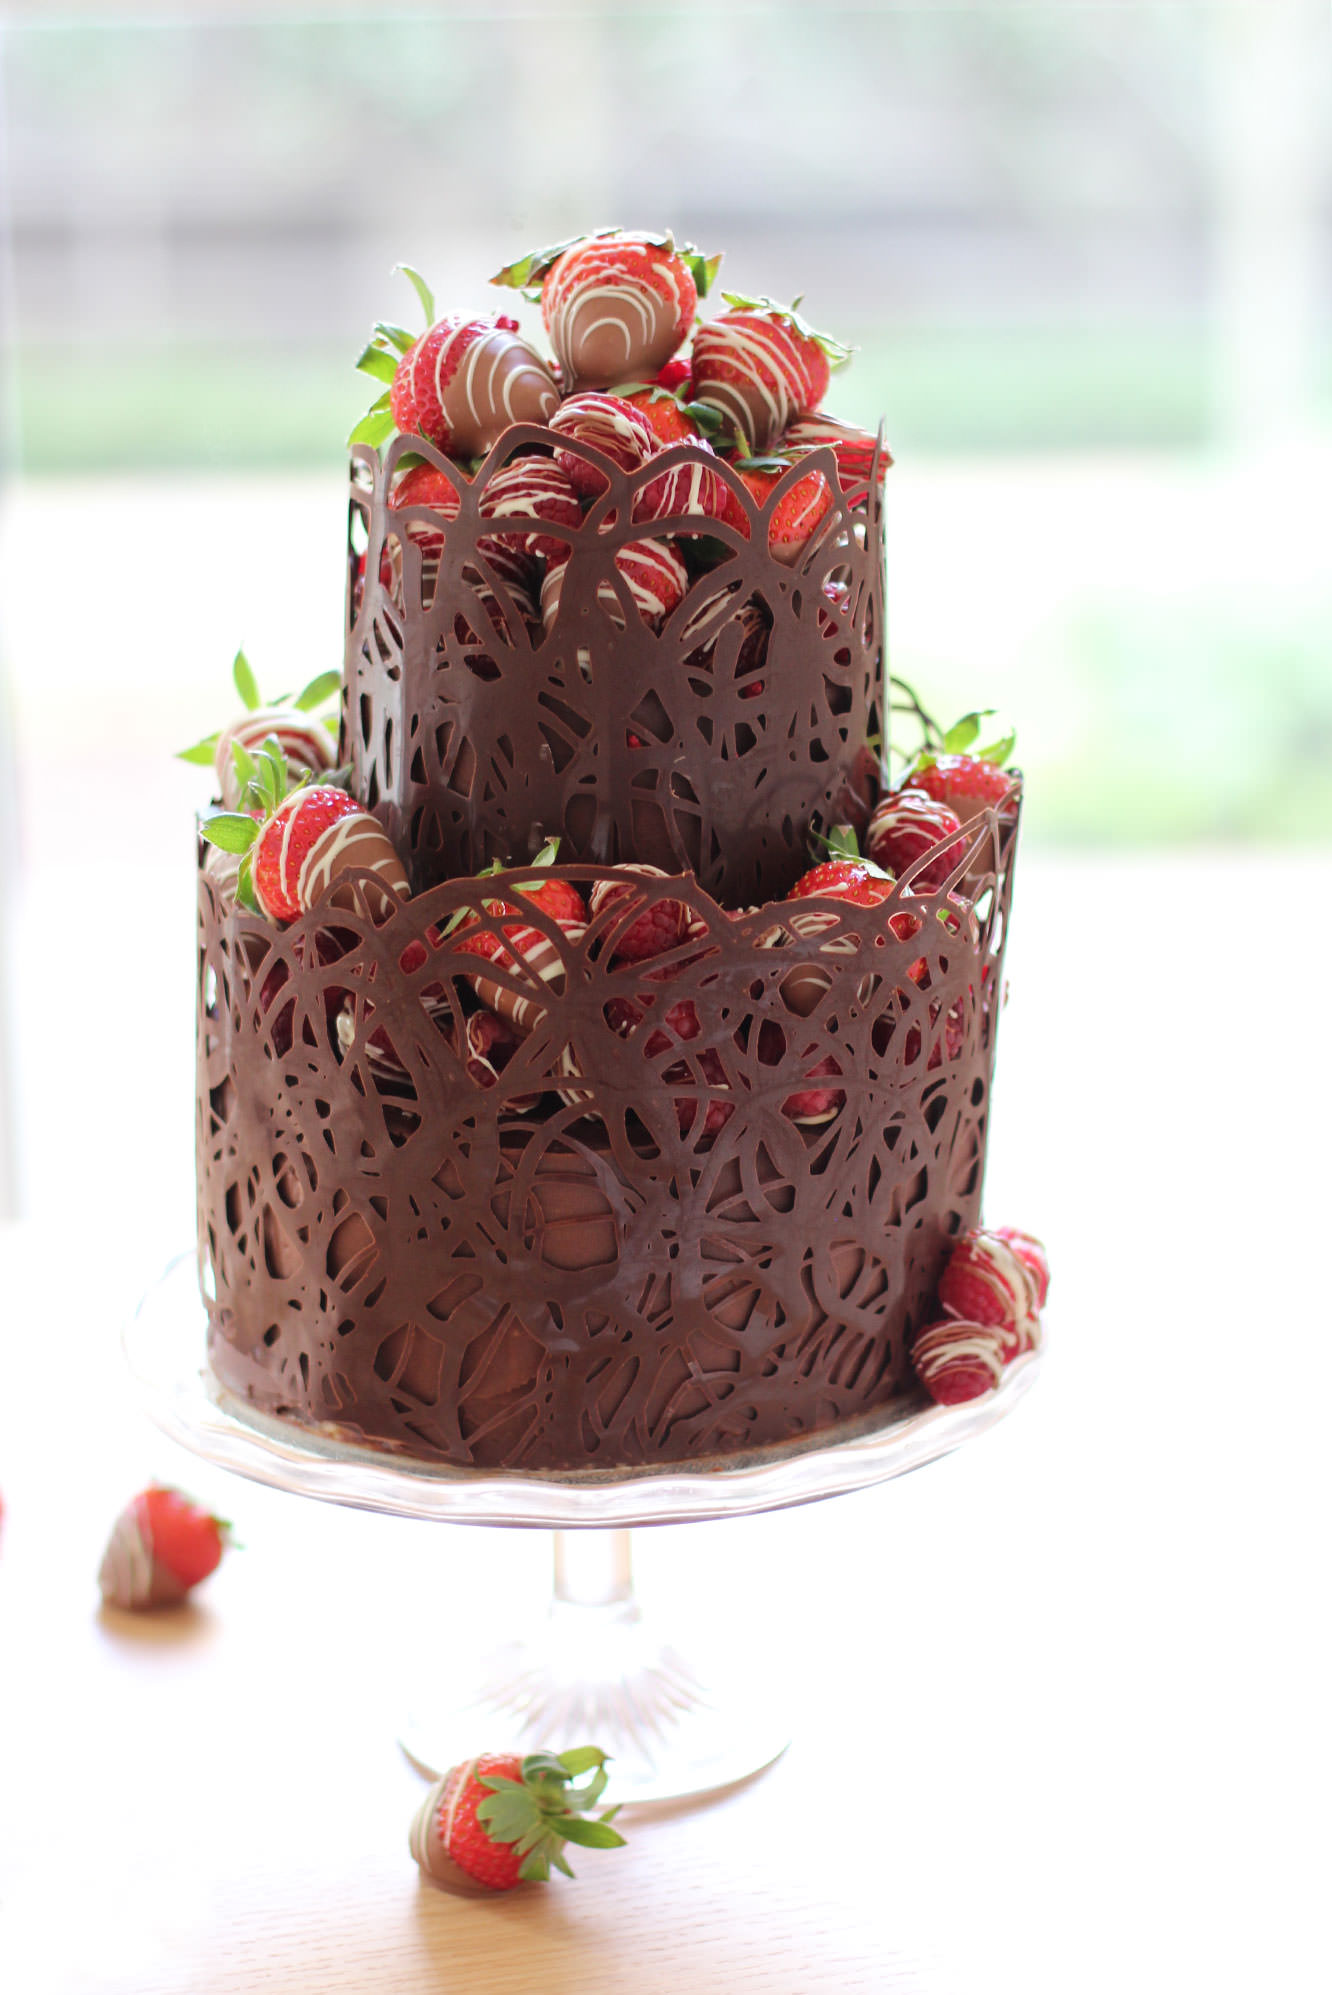 chocolate-salted-caramel-two-tier-occasion-cake-recipe-17